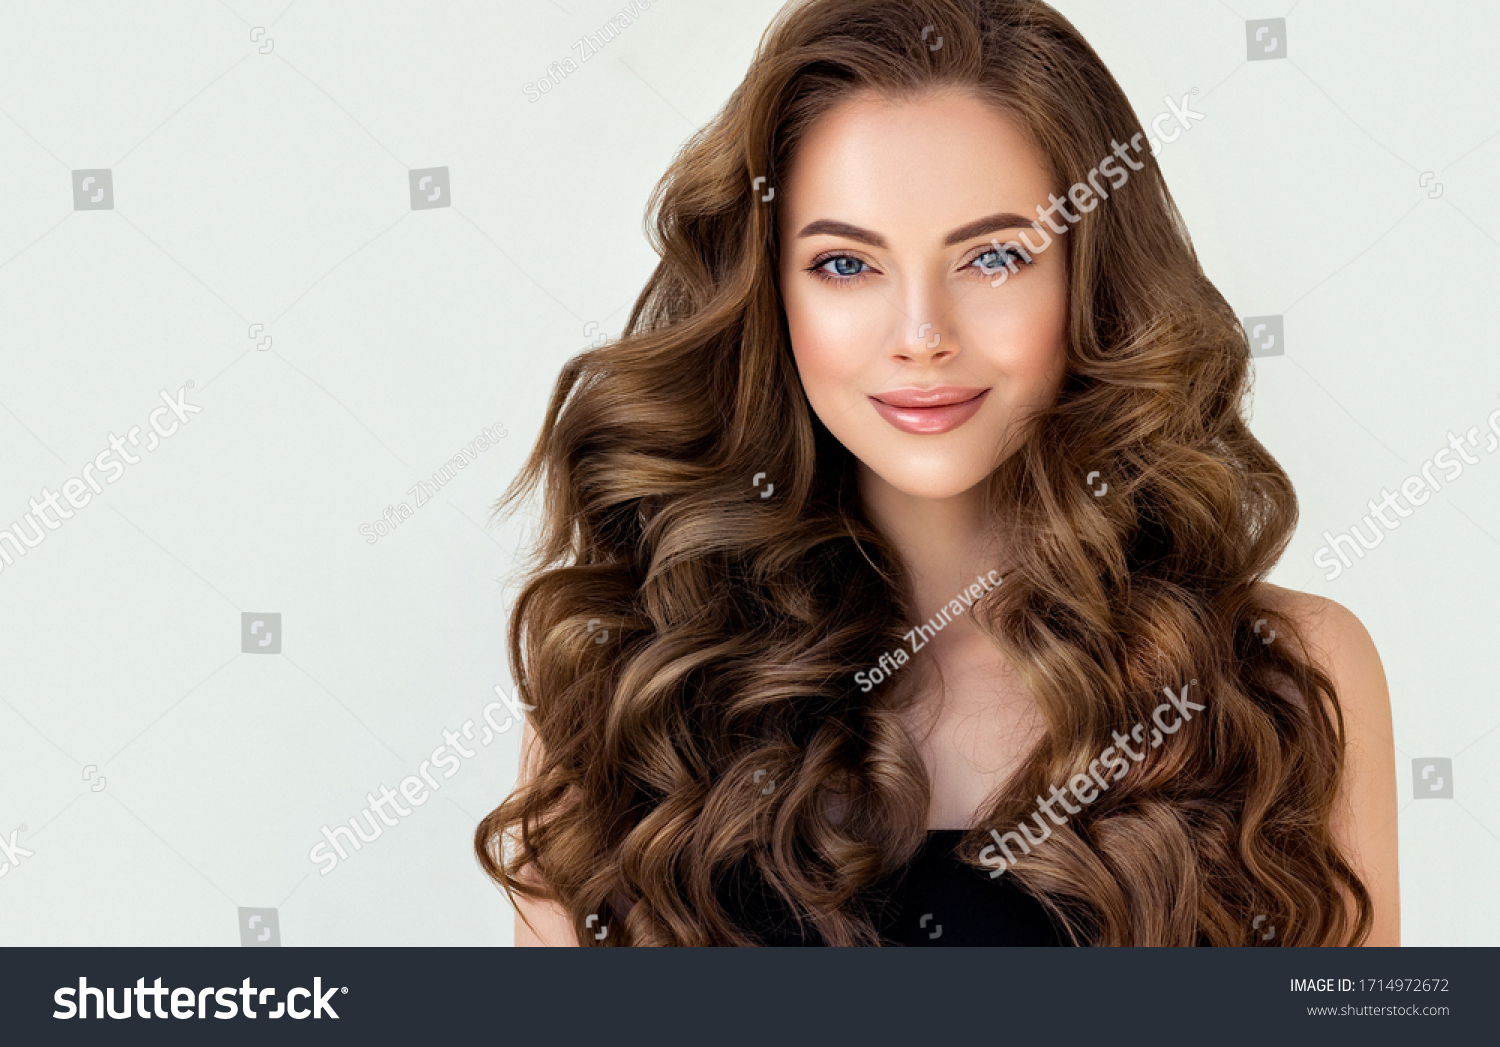 Beautiful laughing brunette model  girl  with long curly  hair . Smiling  woman hairstyle wavy curls . Red  nails manicure .    Fashion , beauty and makeup portrait
